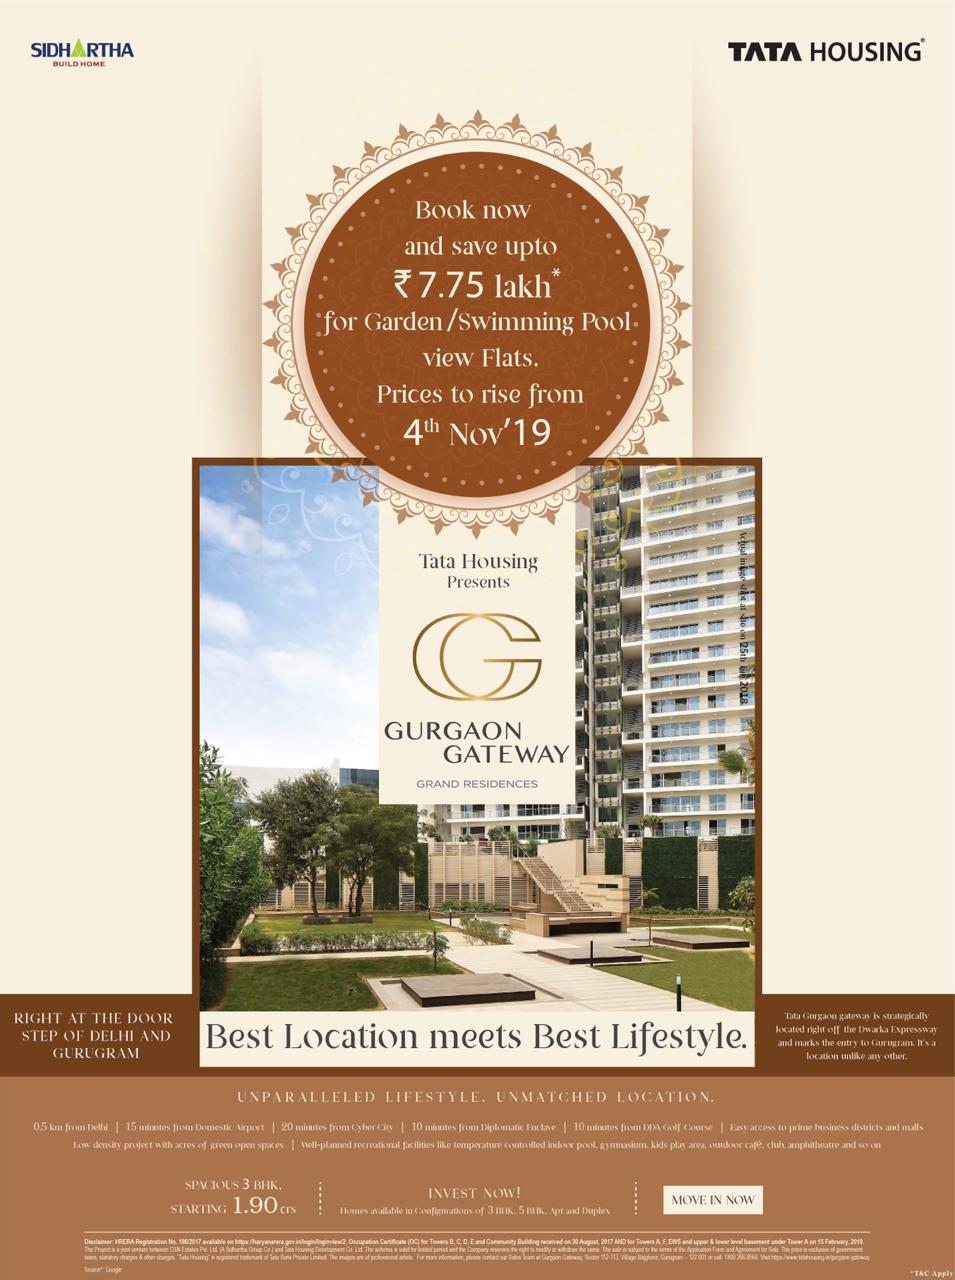 Book now and save up to Rs 7.75 Lac for garden/swimming pool view flats at Tata Gurgaon Gateway, Gurgaon